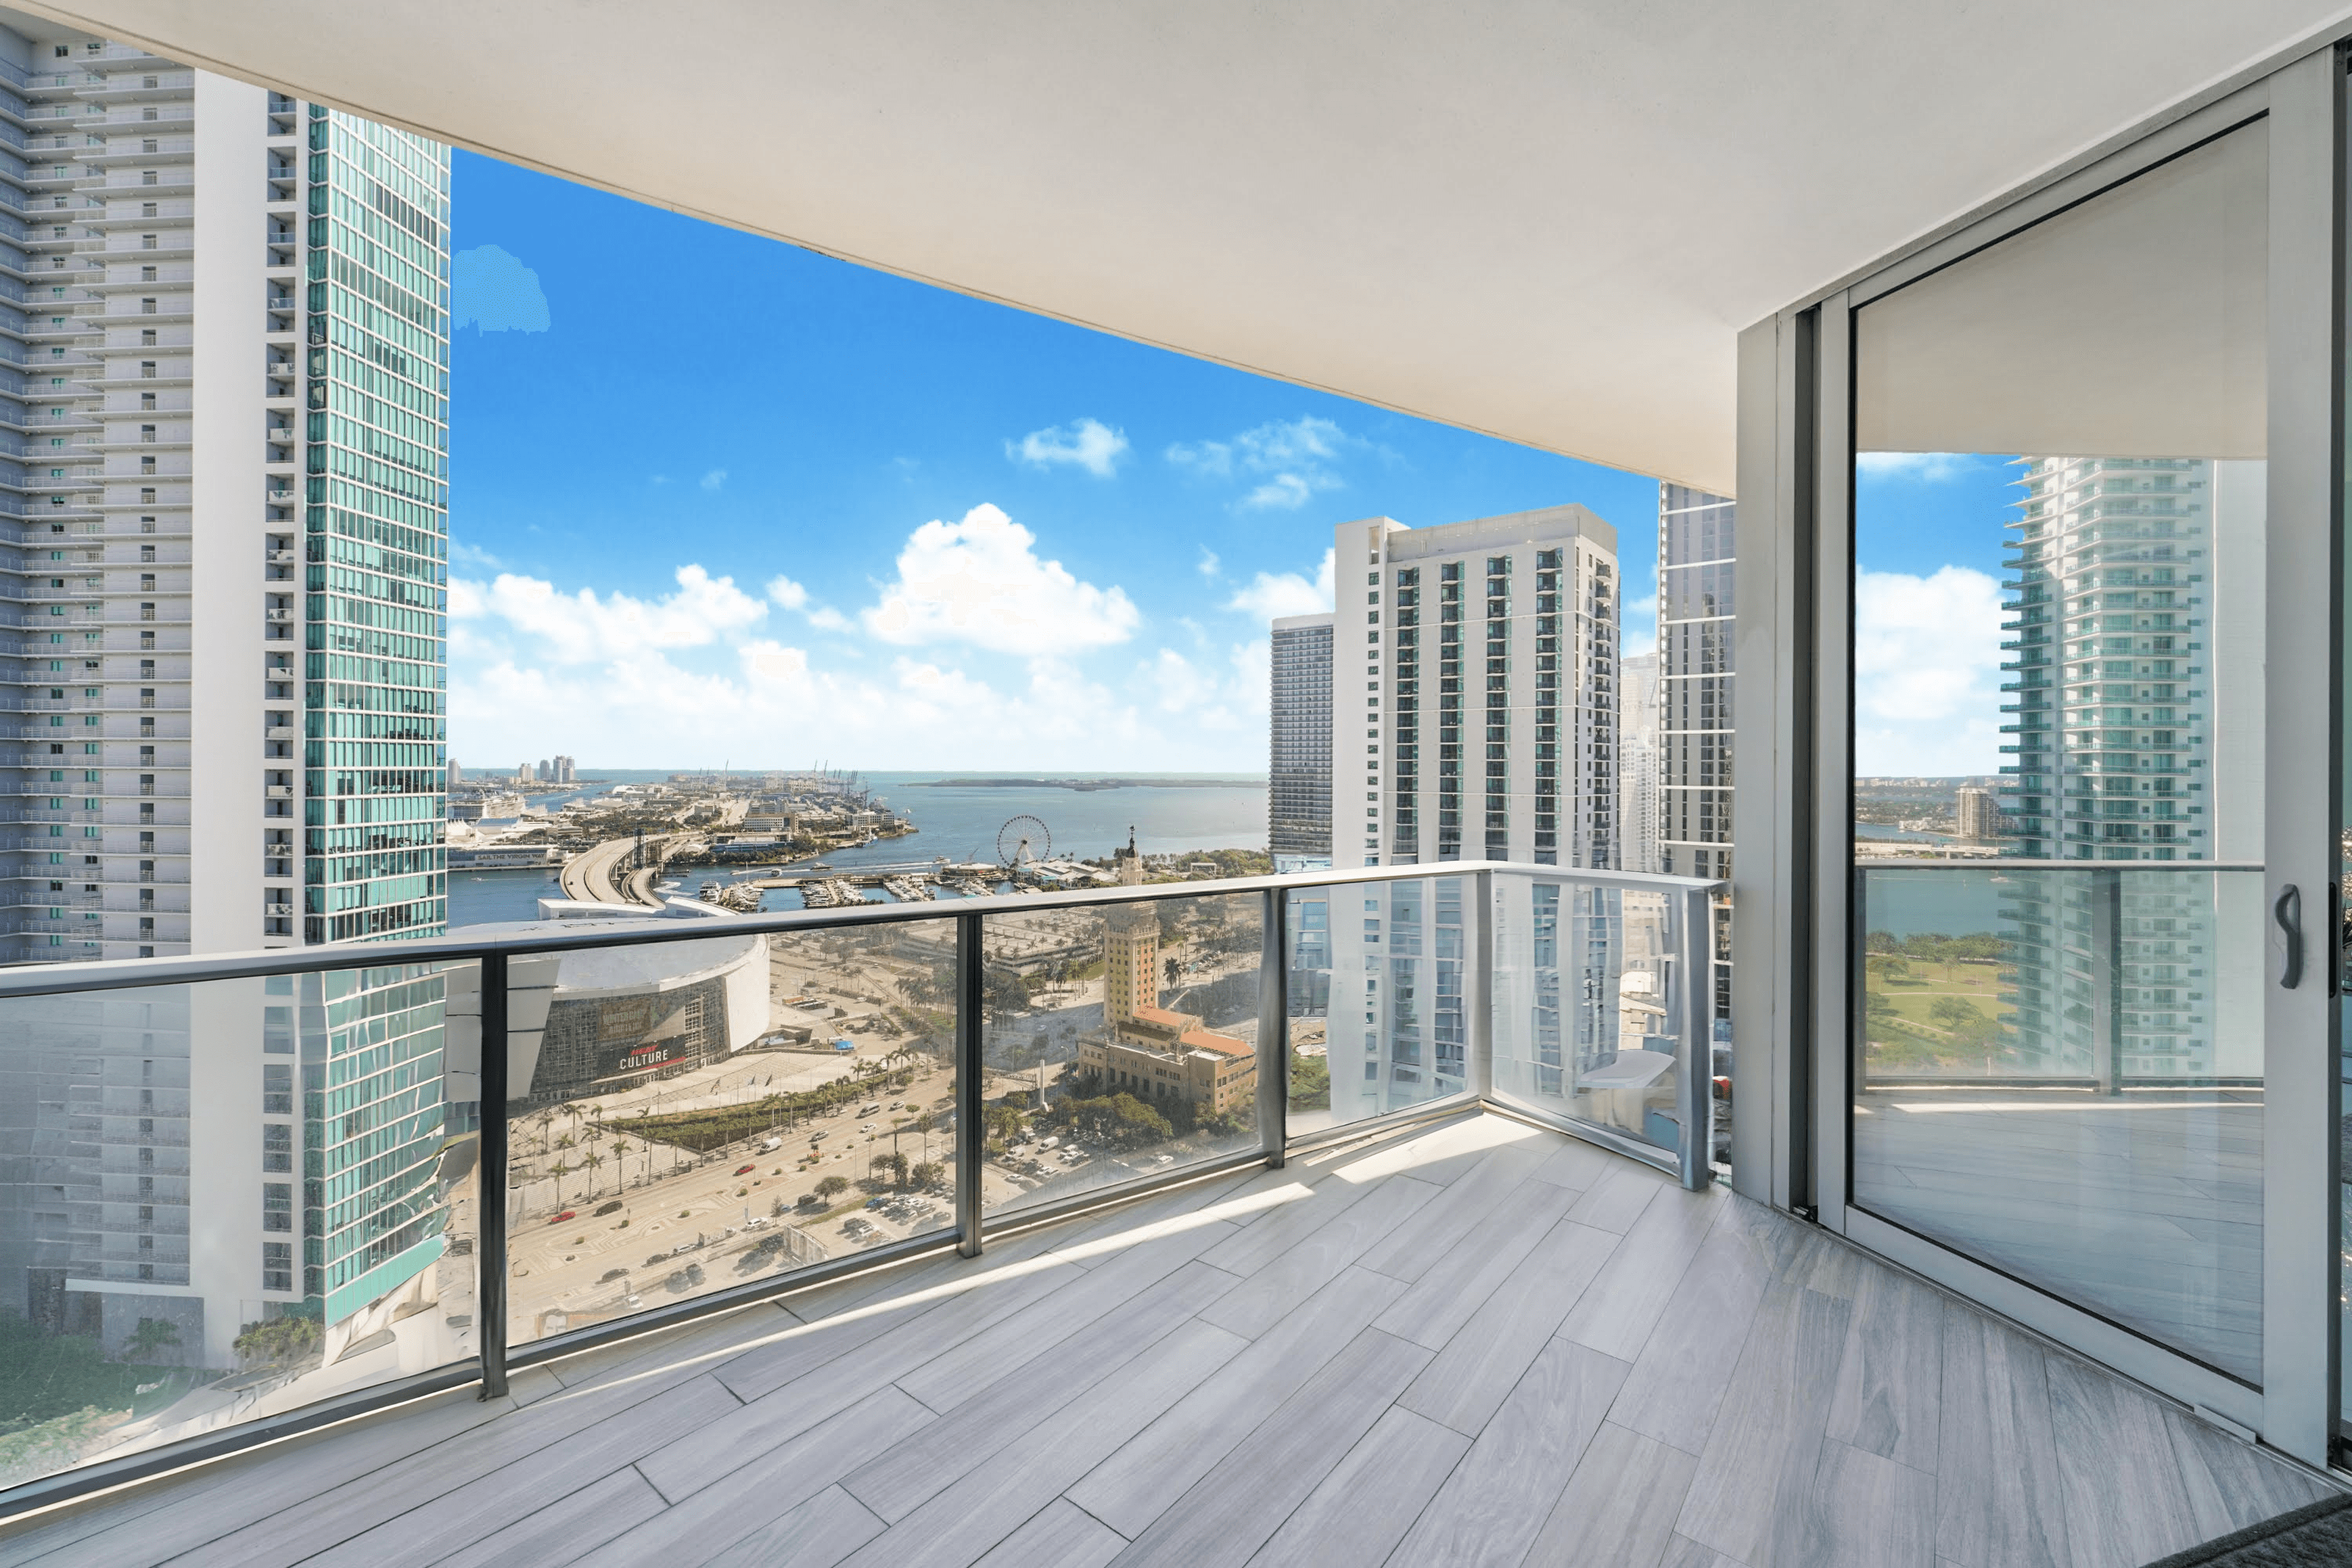 Miami Downtown Paramount World Center | Ocean Views| 2 Bed 3 Bath 1 Office| 1753 sf | 2 Garage |Fully Furnished |